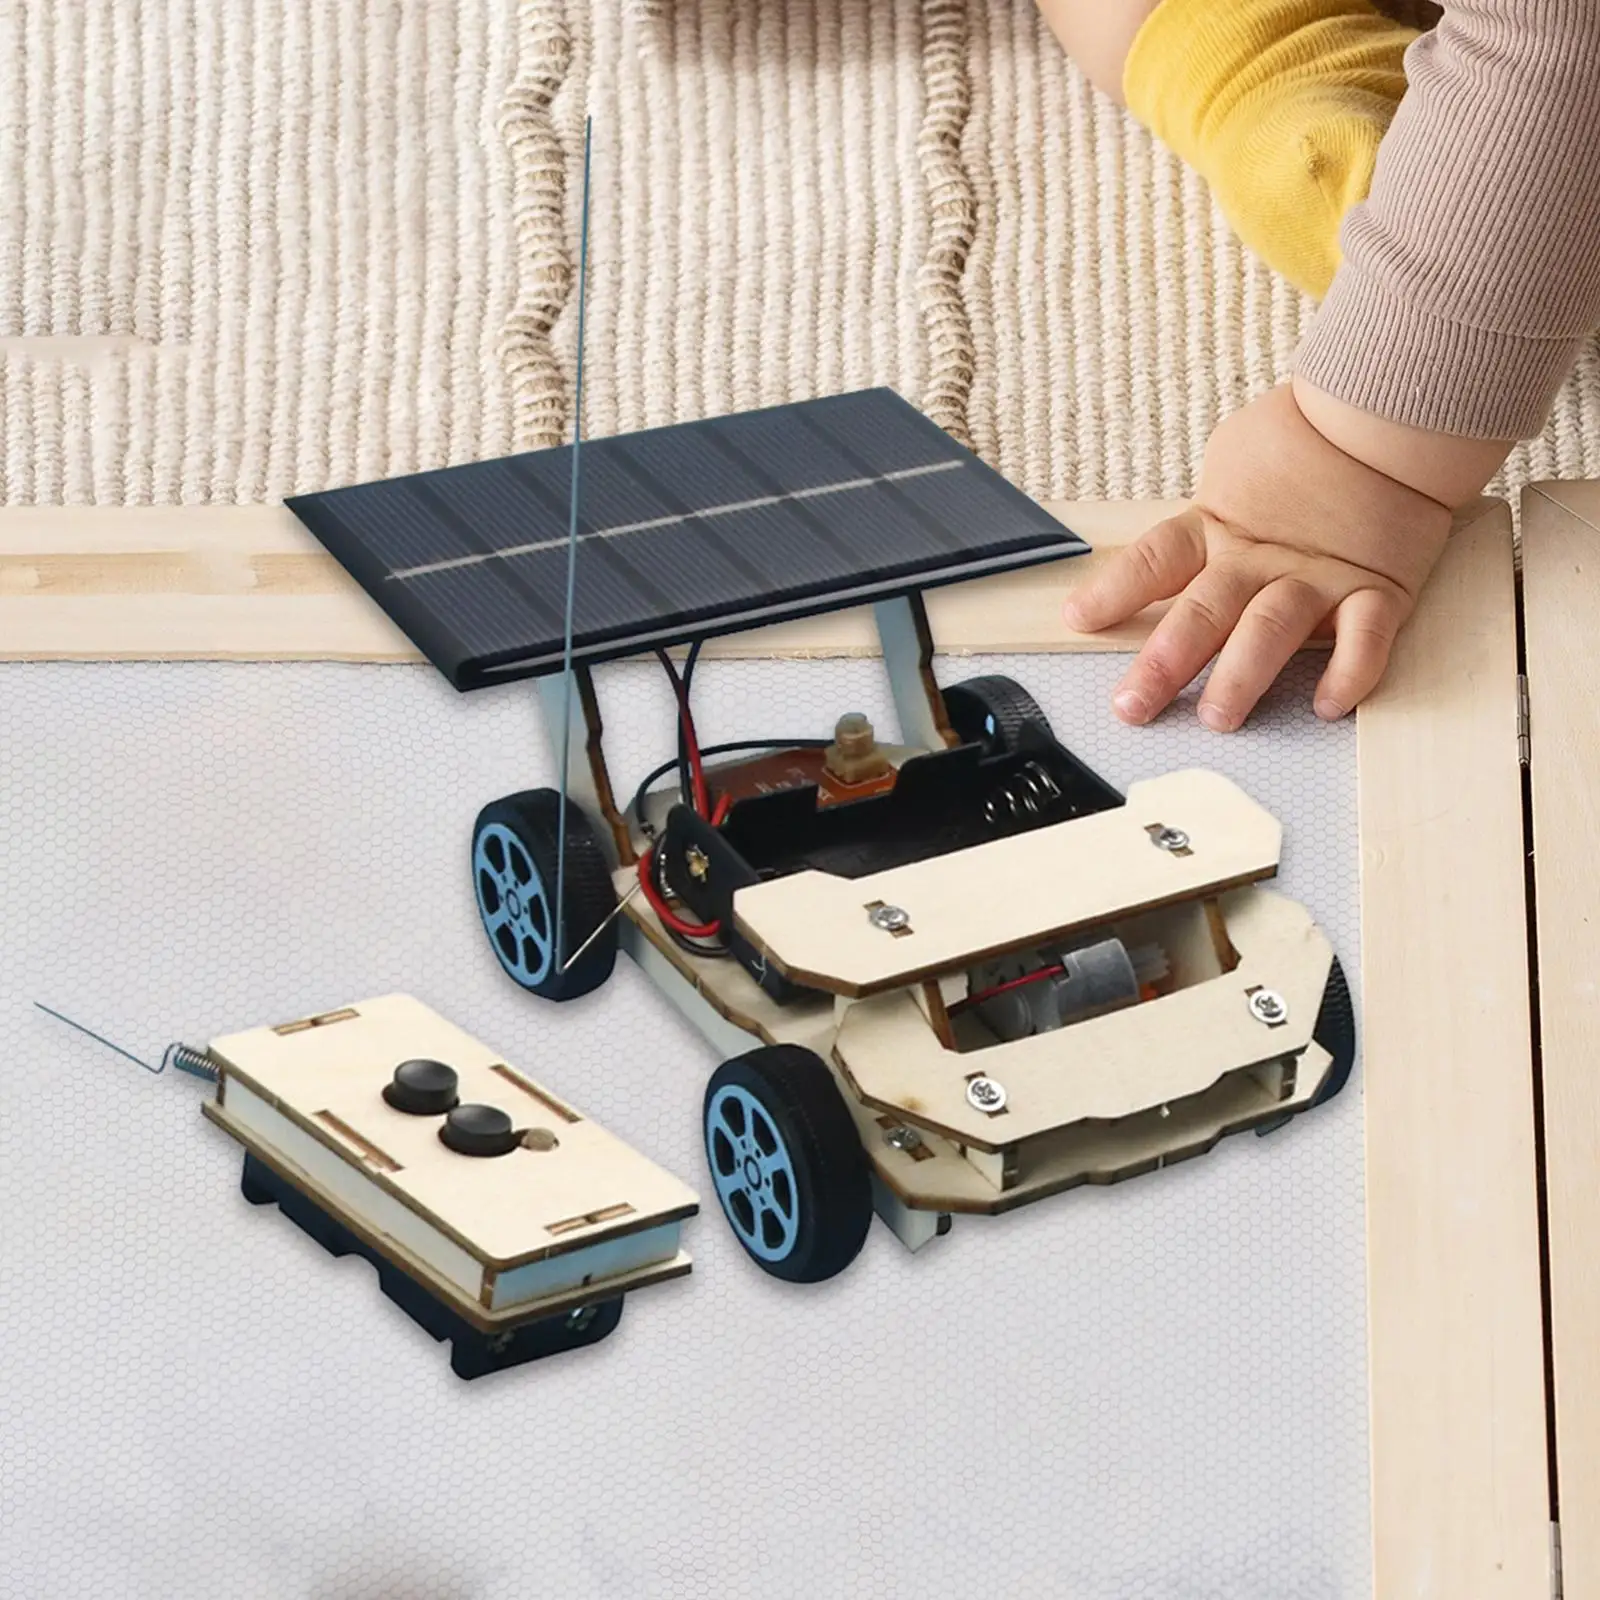 DIY Remote Control Solar Car Model 3D Puzzles Wooden Motor for Age 8-12 Kids